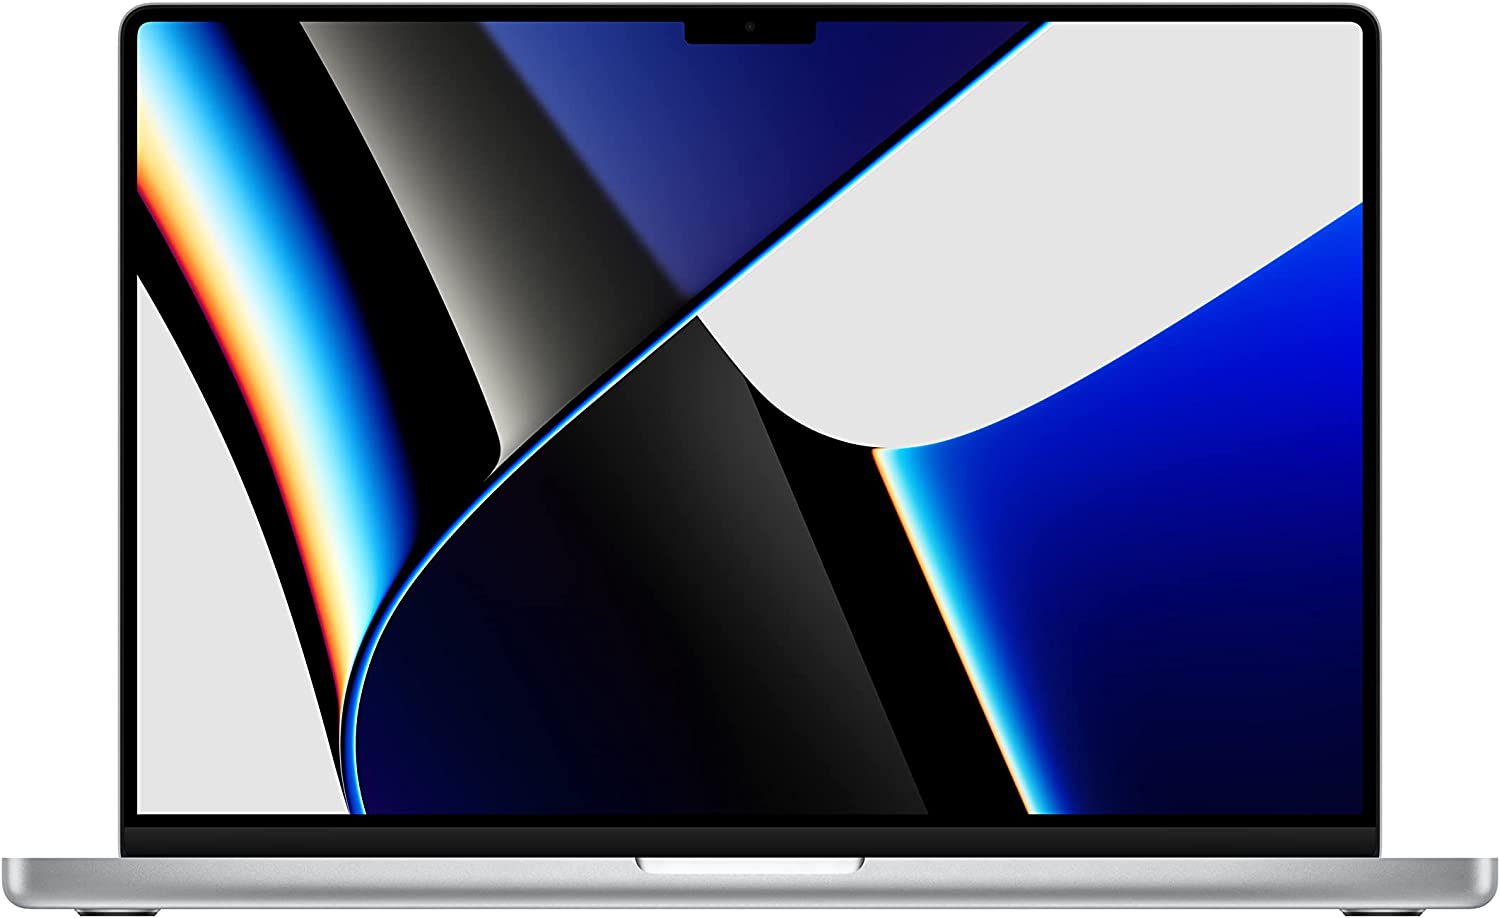 Which New Features Matter the Most in the 2021 MacBook Pro Line?